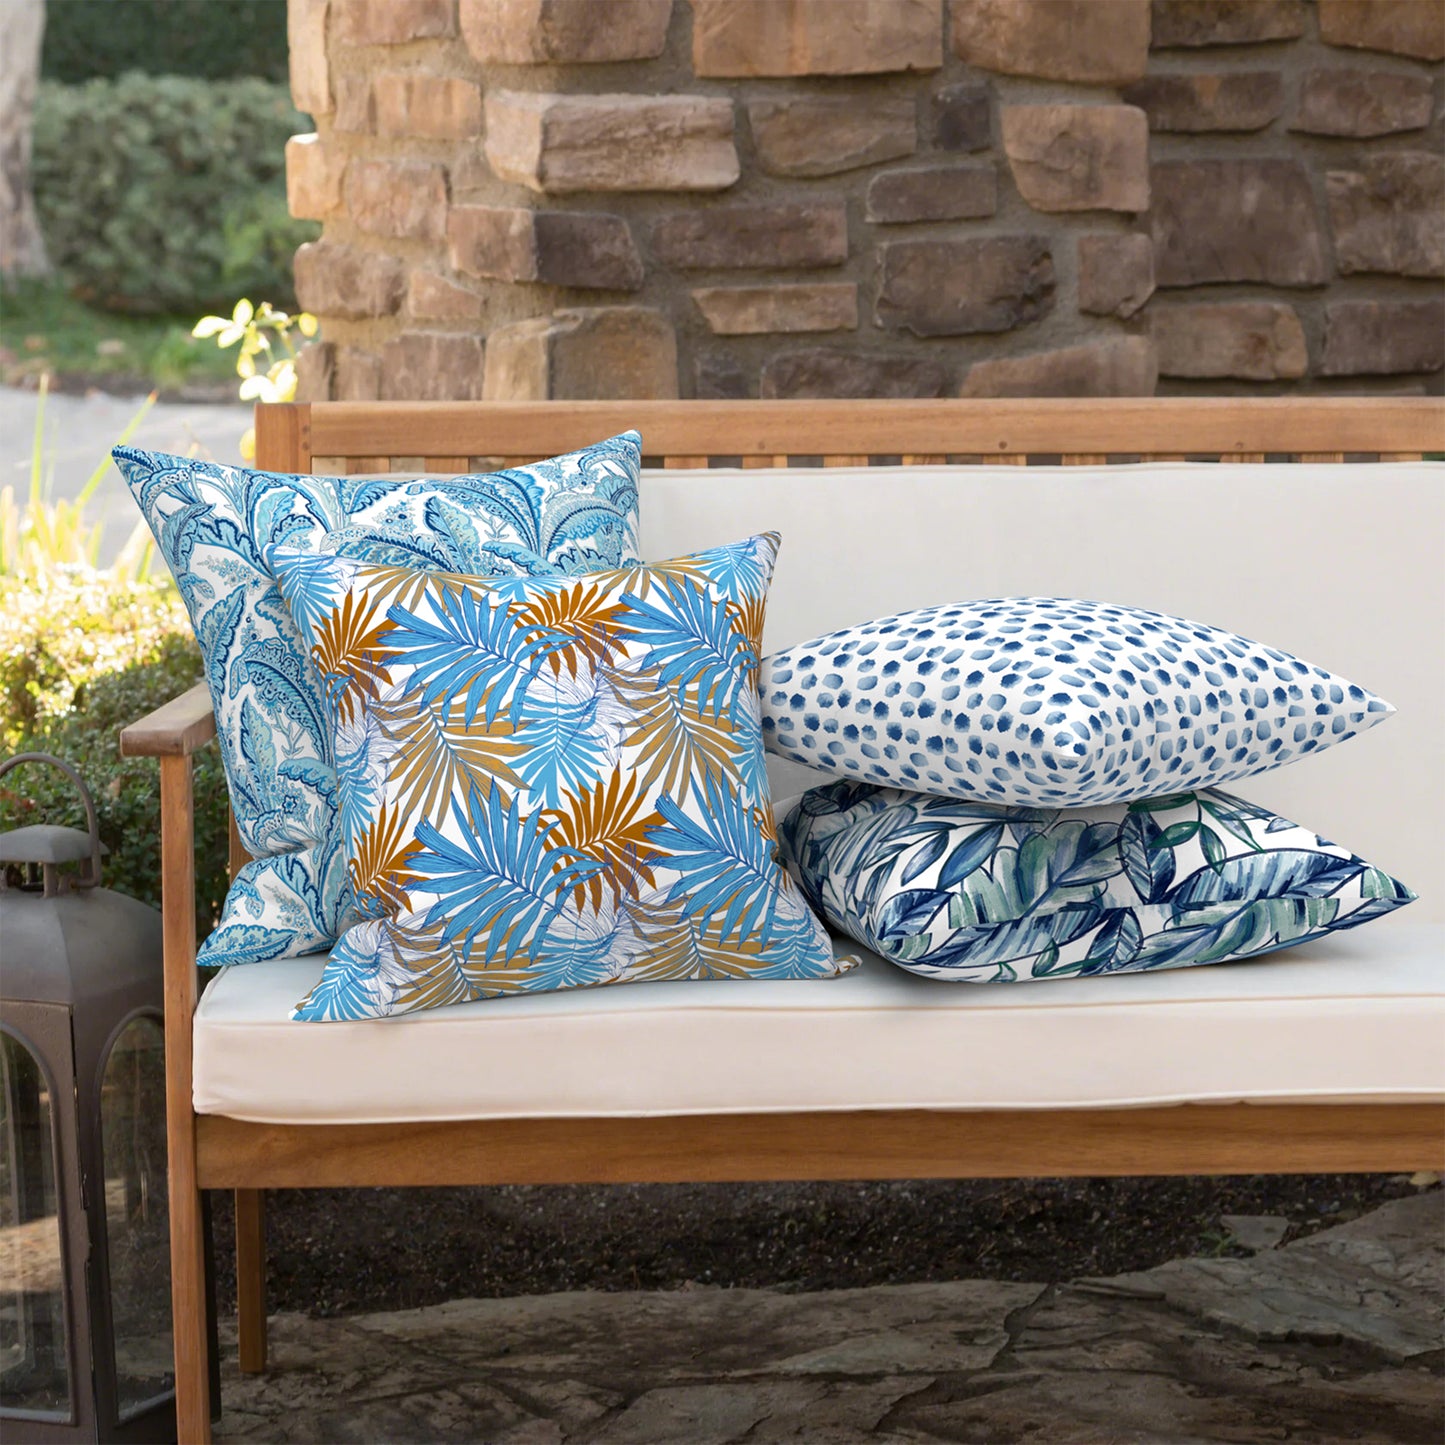 Melody Elephant Outdoor/Indoor Throw Pillow Covers Set of 2, All Weather Square Pillow Cases 16x16 Inch, Patio Cushion Pillow of Home Furniture Use, Piermont Leaves Blue